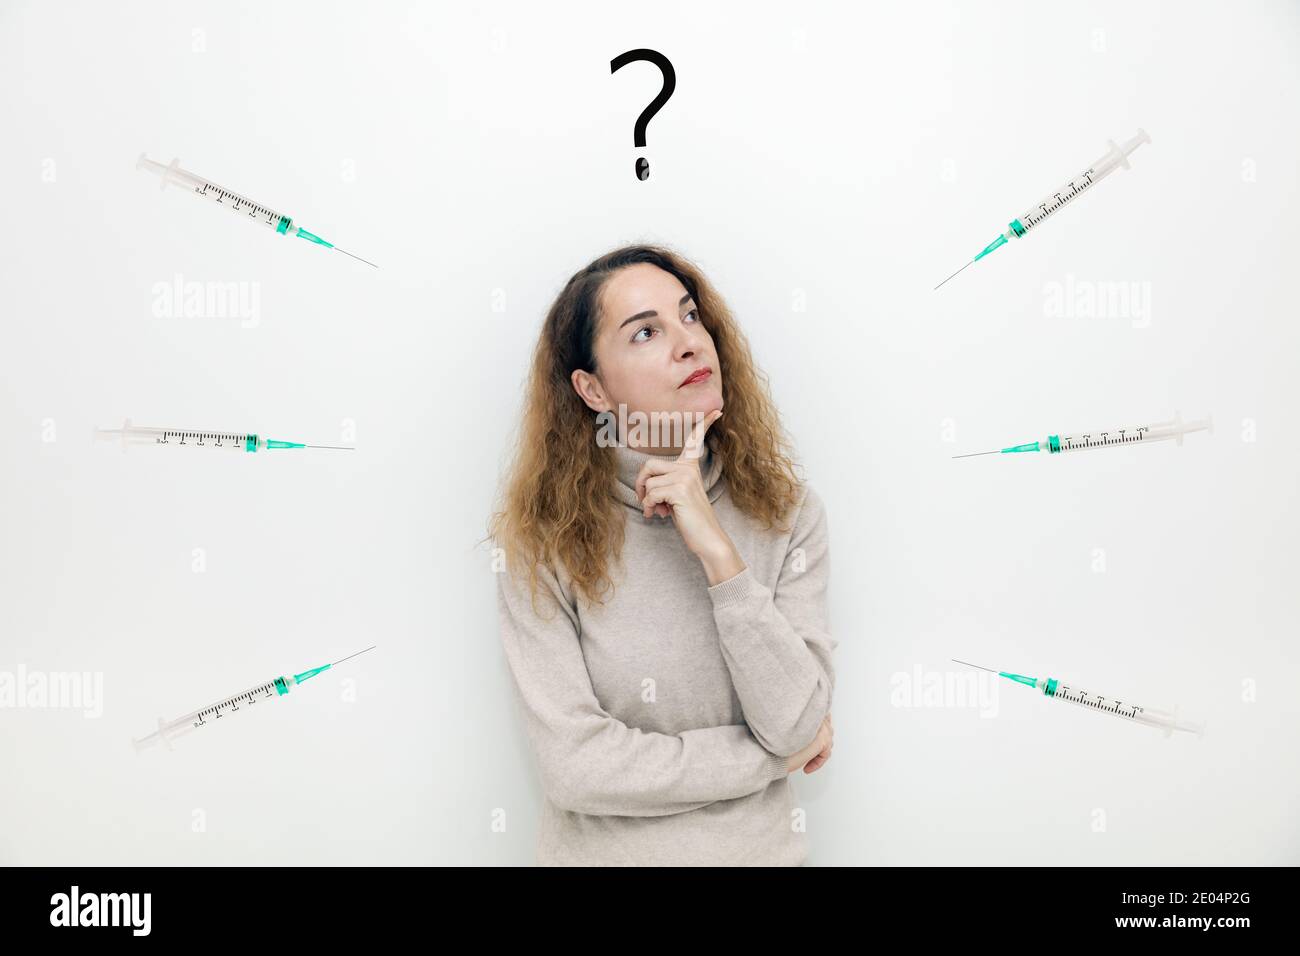 A woman with syringes around her thinking with serious face about question and doubts. Stock Photo